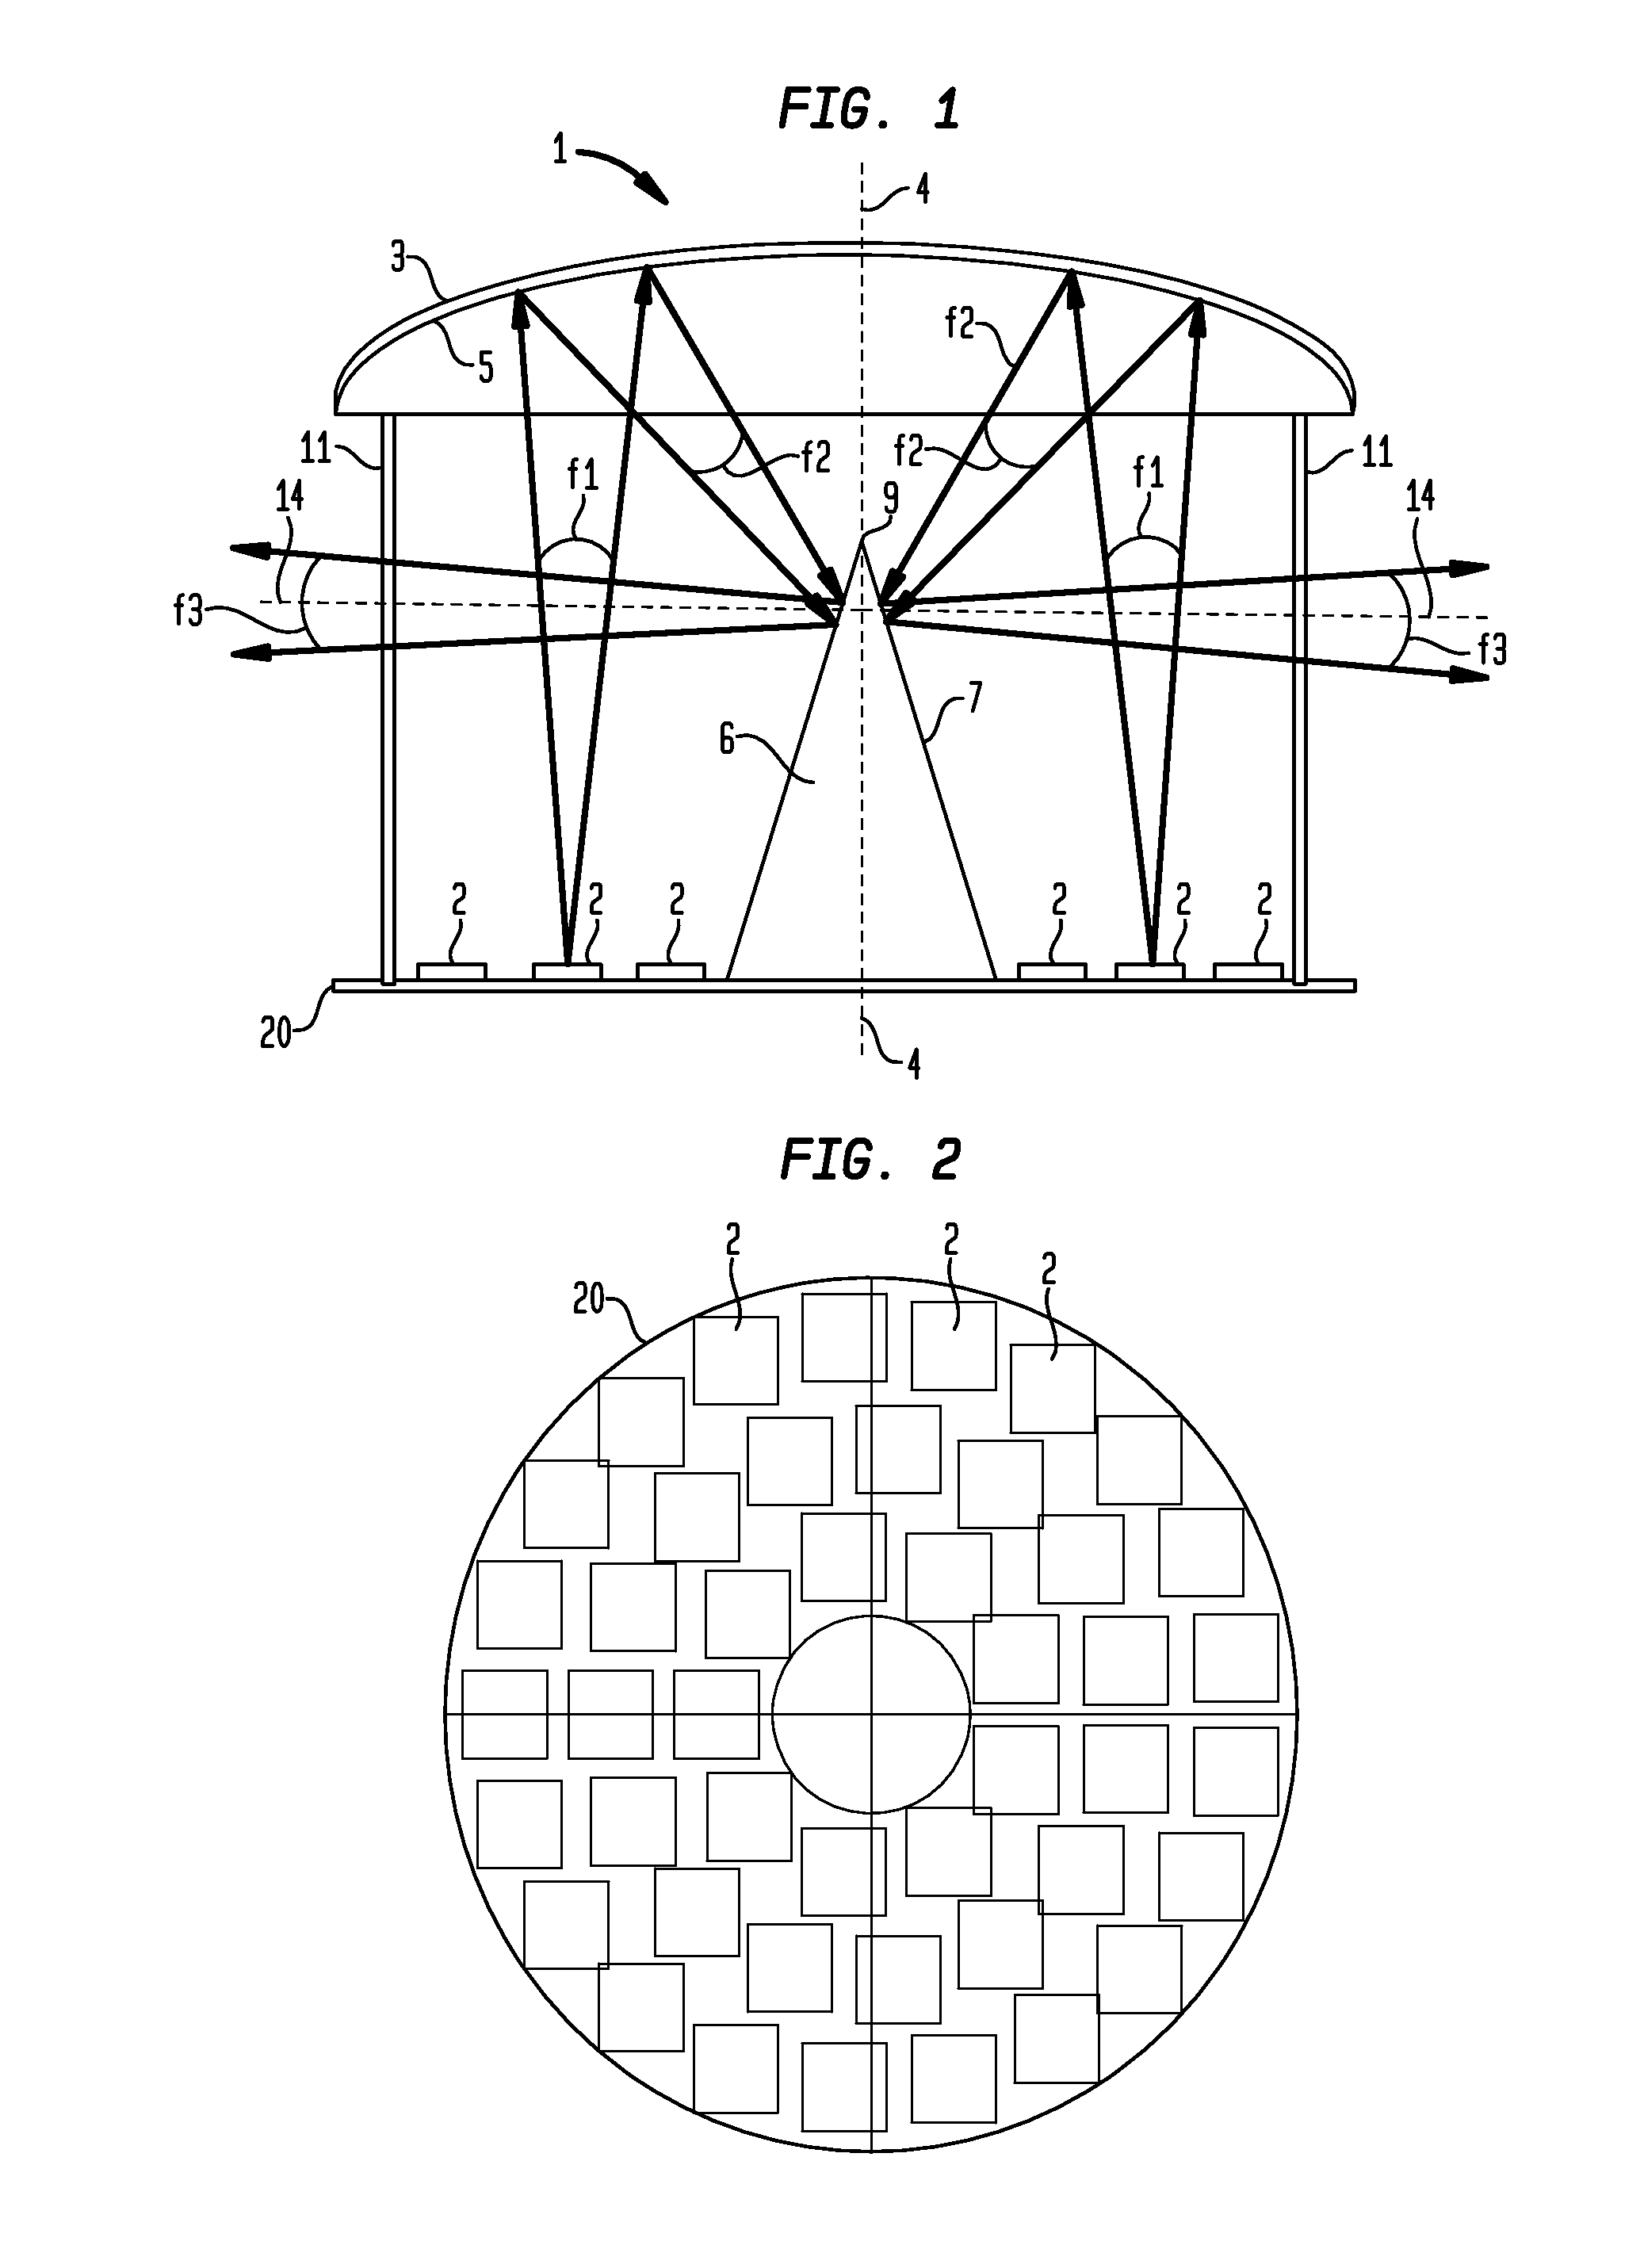 Lighting devices comprising an array of optoelectronic sources